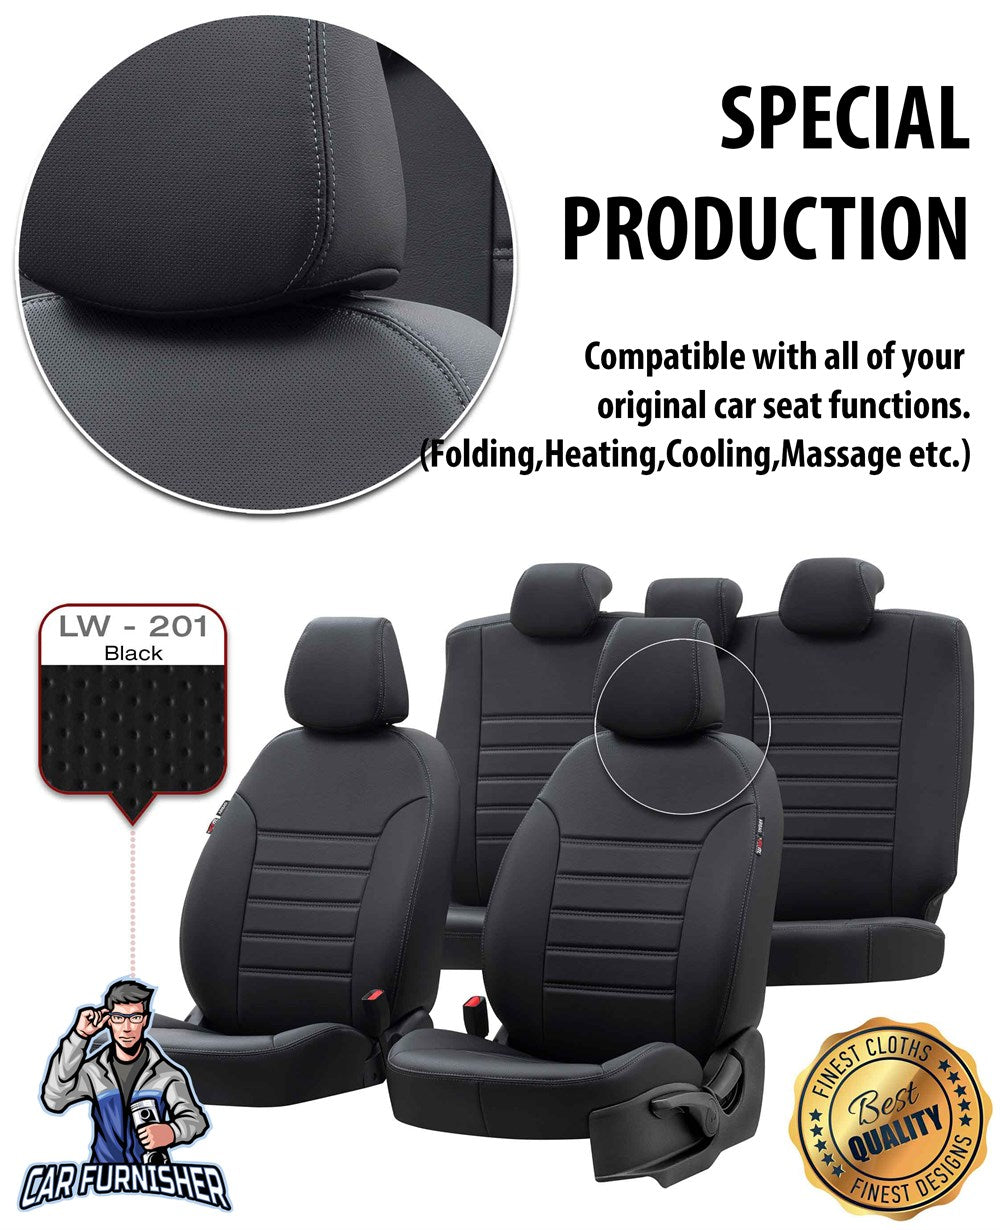 Mitsubishi Outlander Seat Covers Istanbul Leather Design Smoked Black Leather